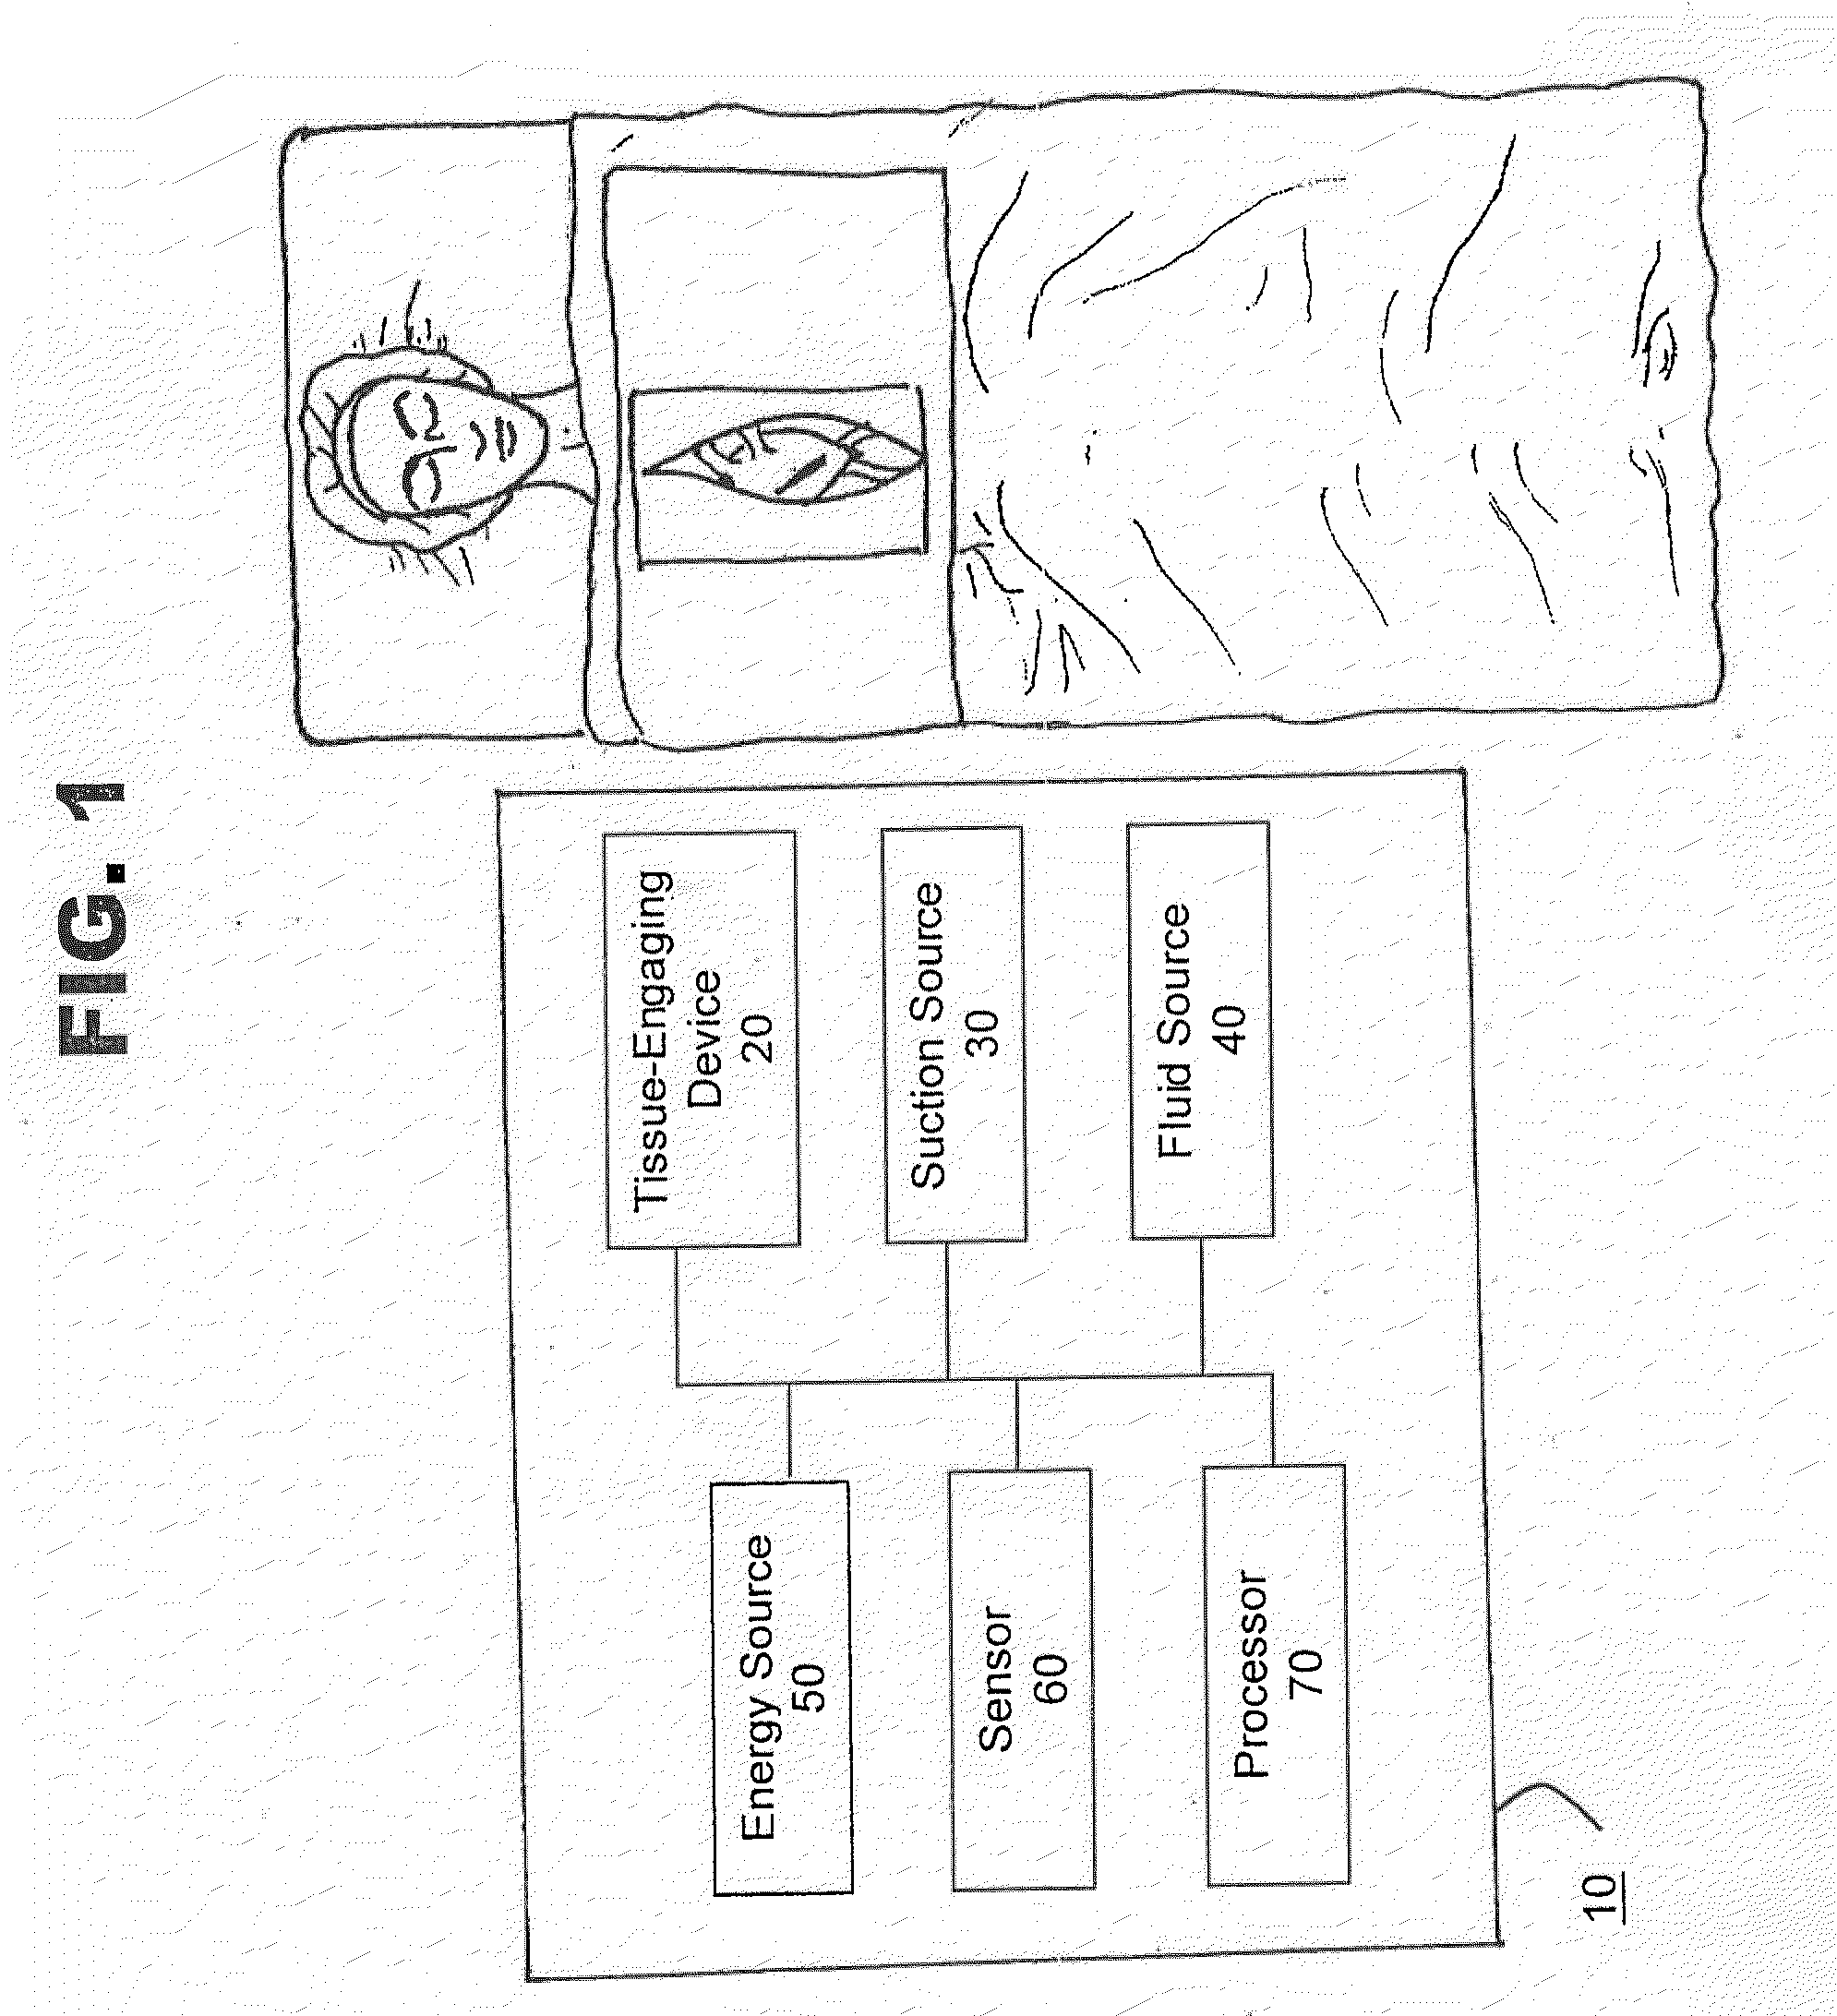 Method and System for Organ Positioning and Stabilization